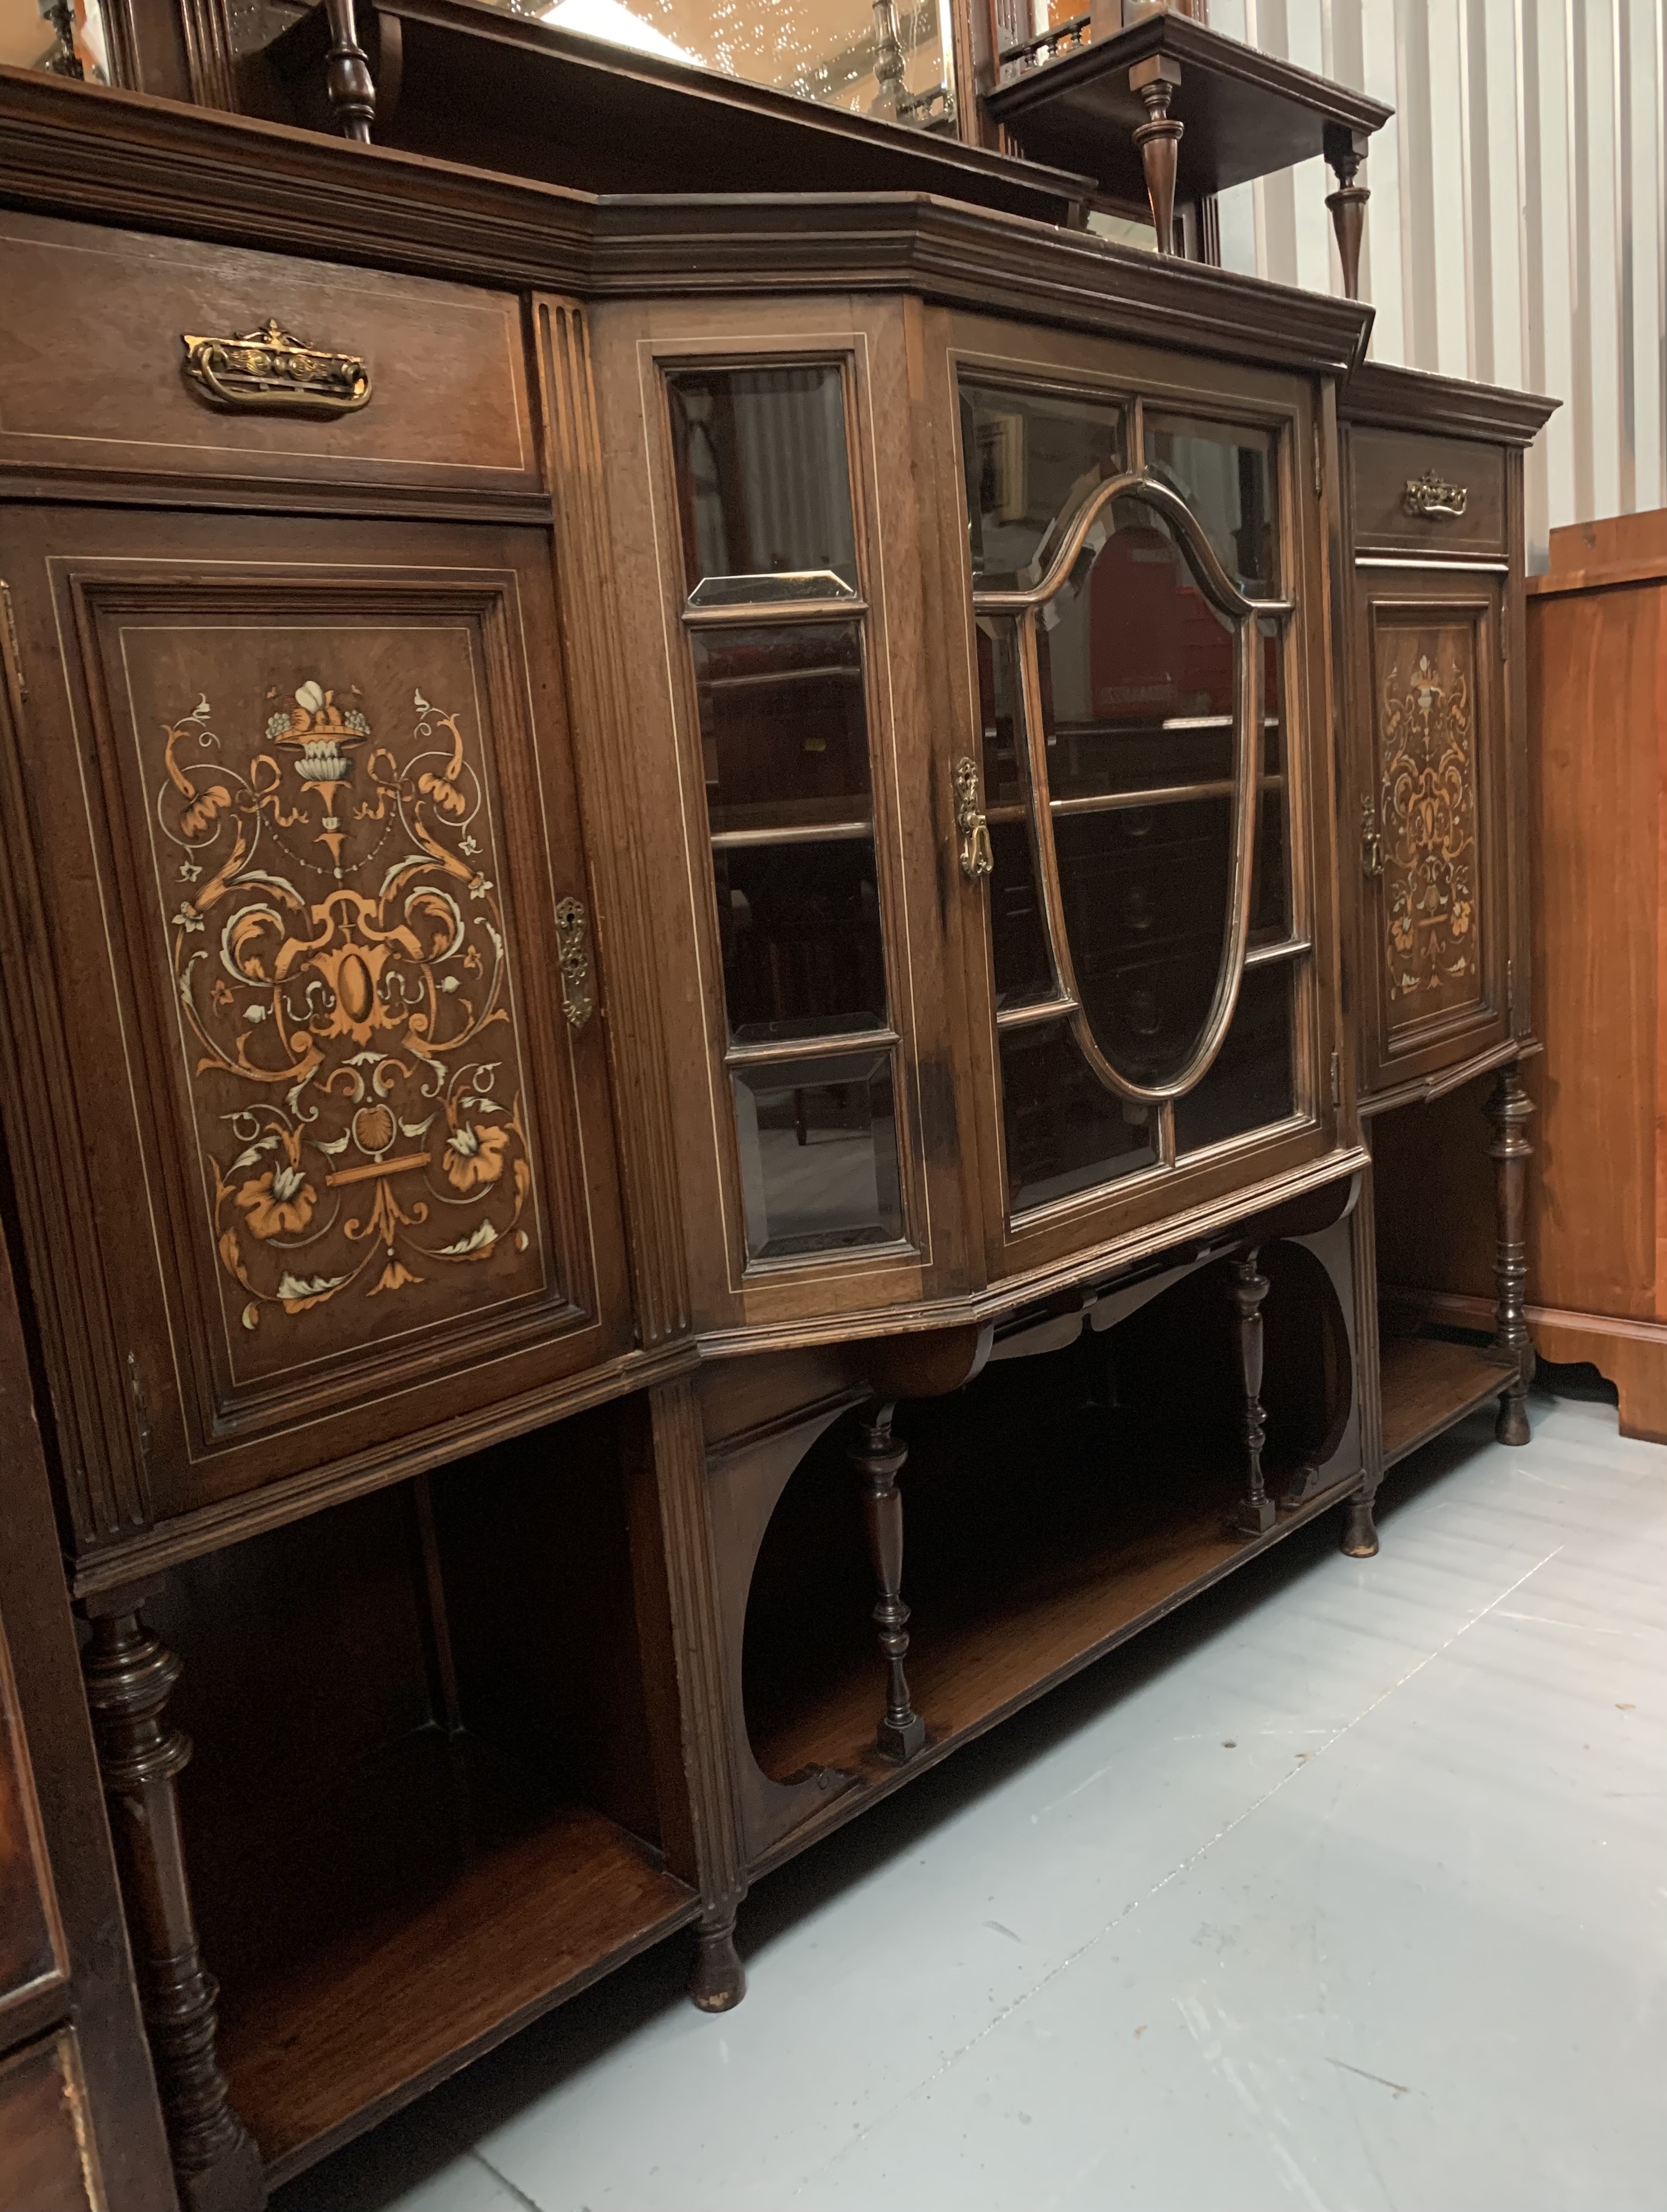 Inlaid antique mirrorback cabinet. 75” high, 60” wide, 18” depth - Image 6 of 6